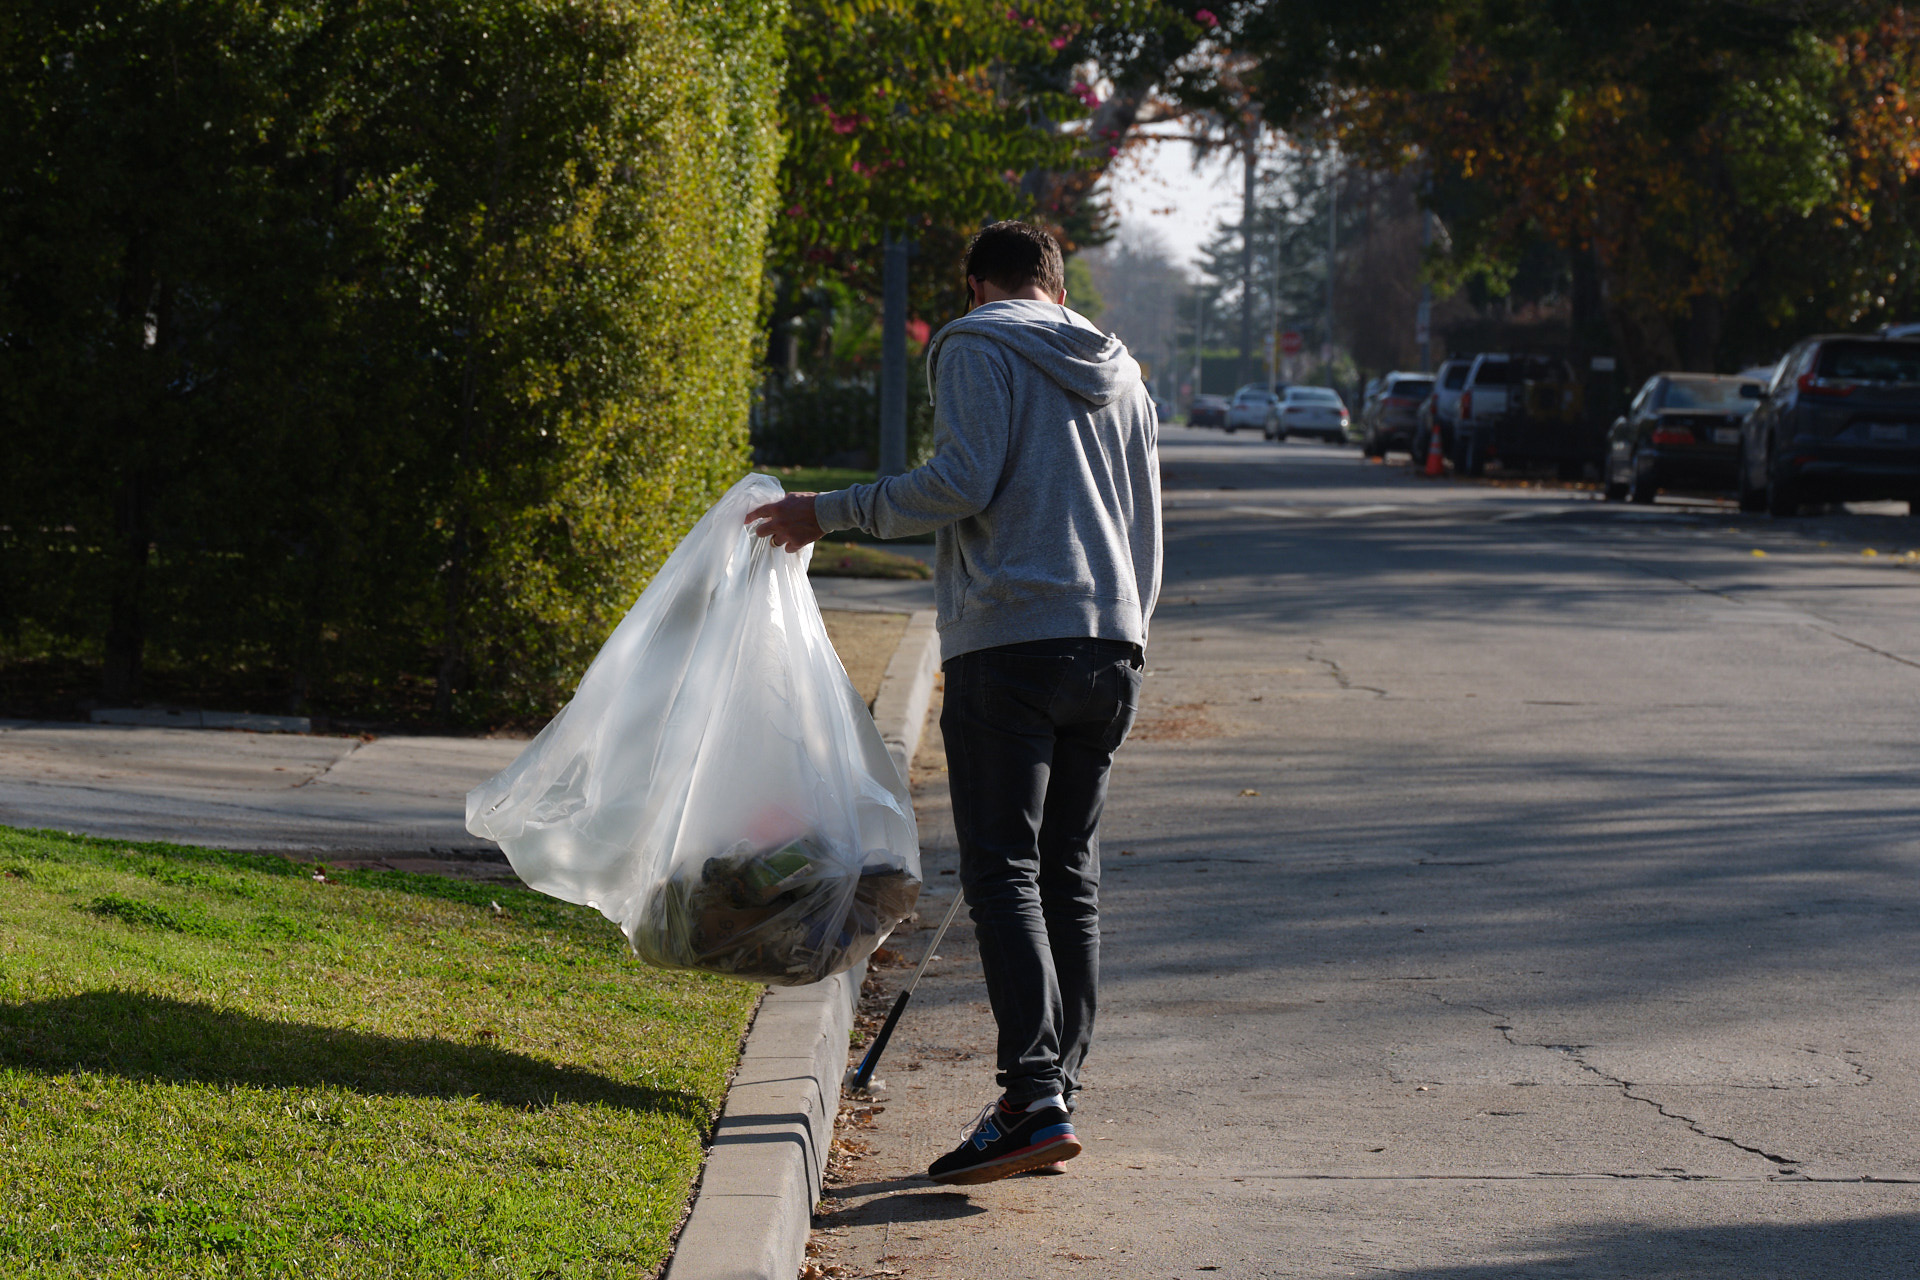 west-toluca-lake-community-cleanup-5